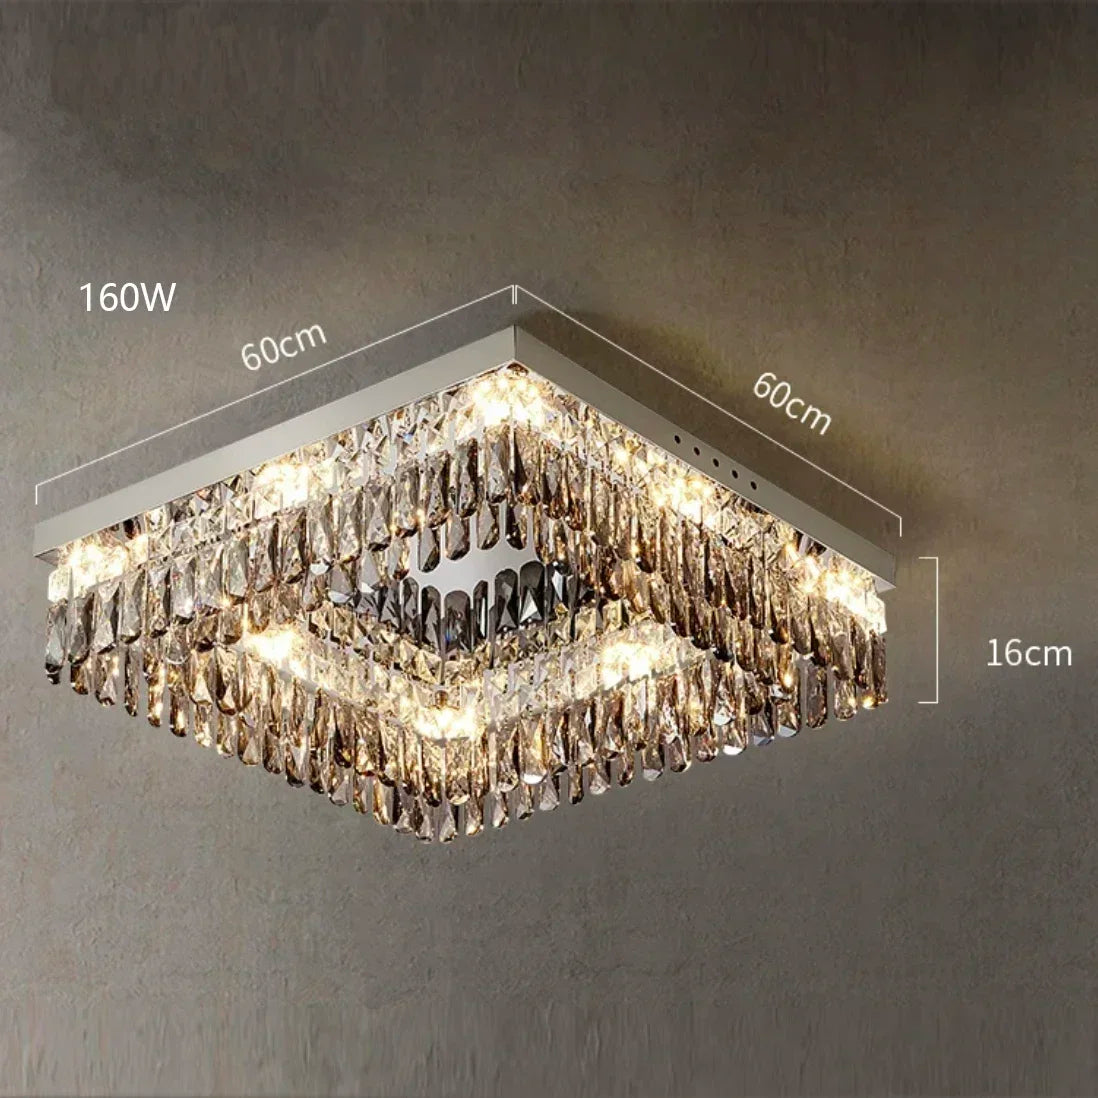 A close-up image of a square Giano Crystal Ceiling Light by Morsale.com, measuring 60 cm by 60 cm in width and 16 cm in height. This luxury chandelier has a contemporary design with multiple crystal strands and 160W power, emitting bright light.